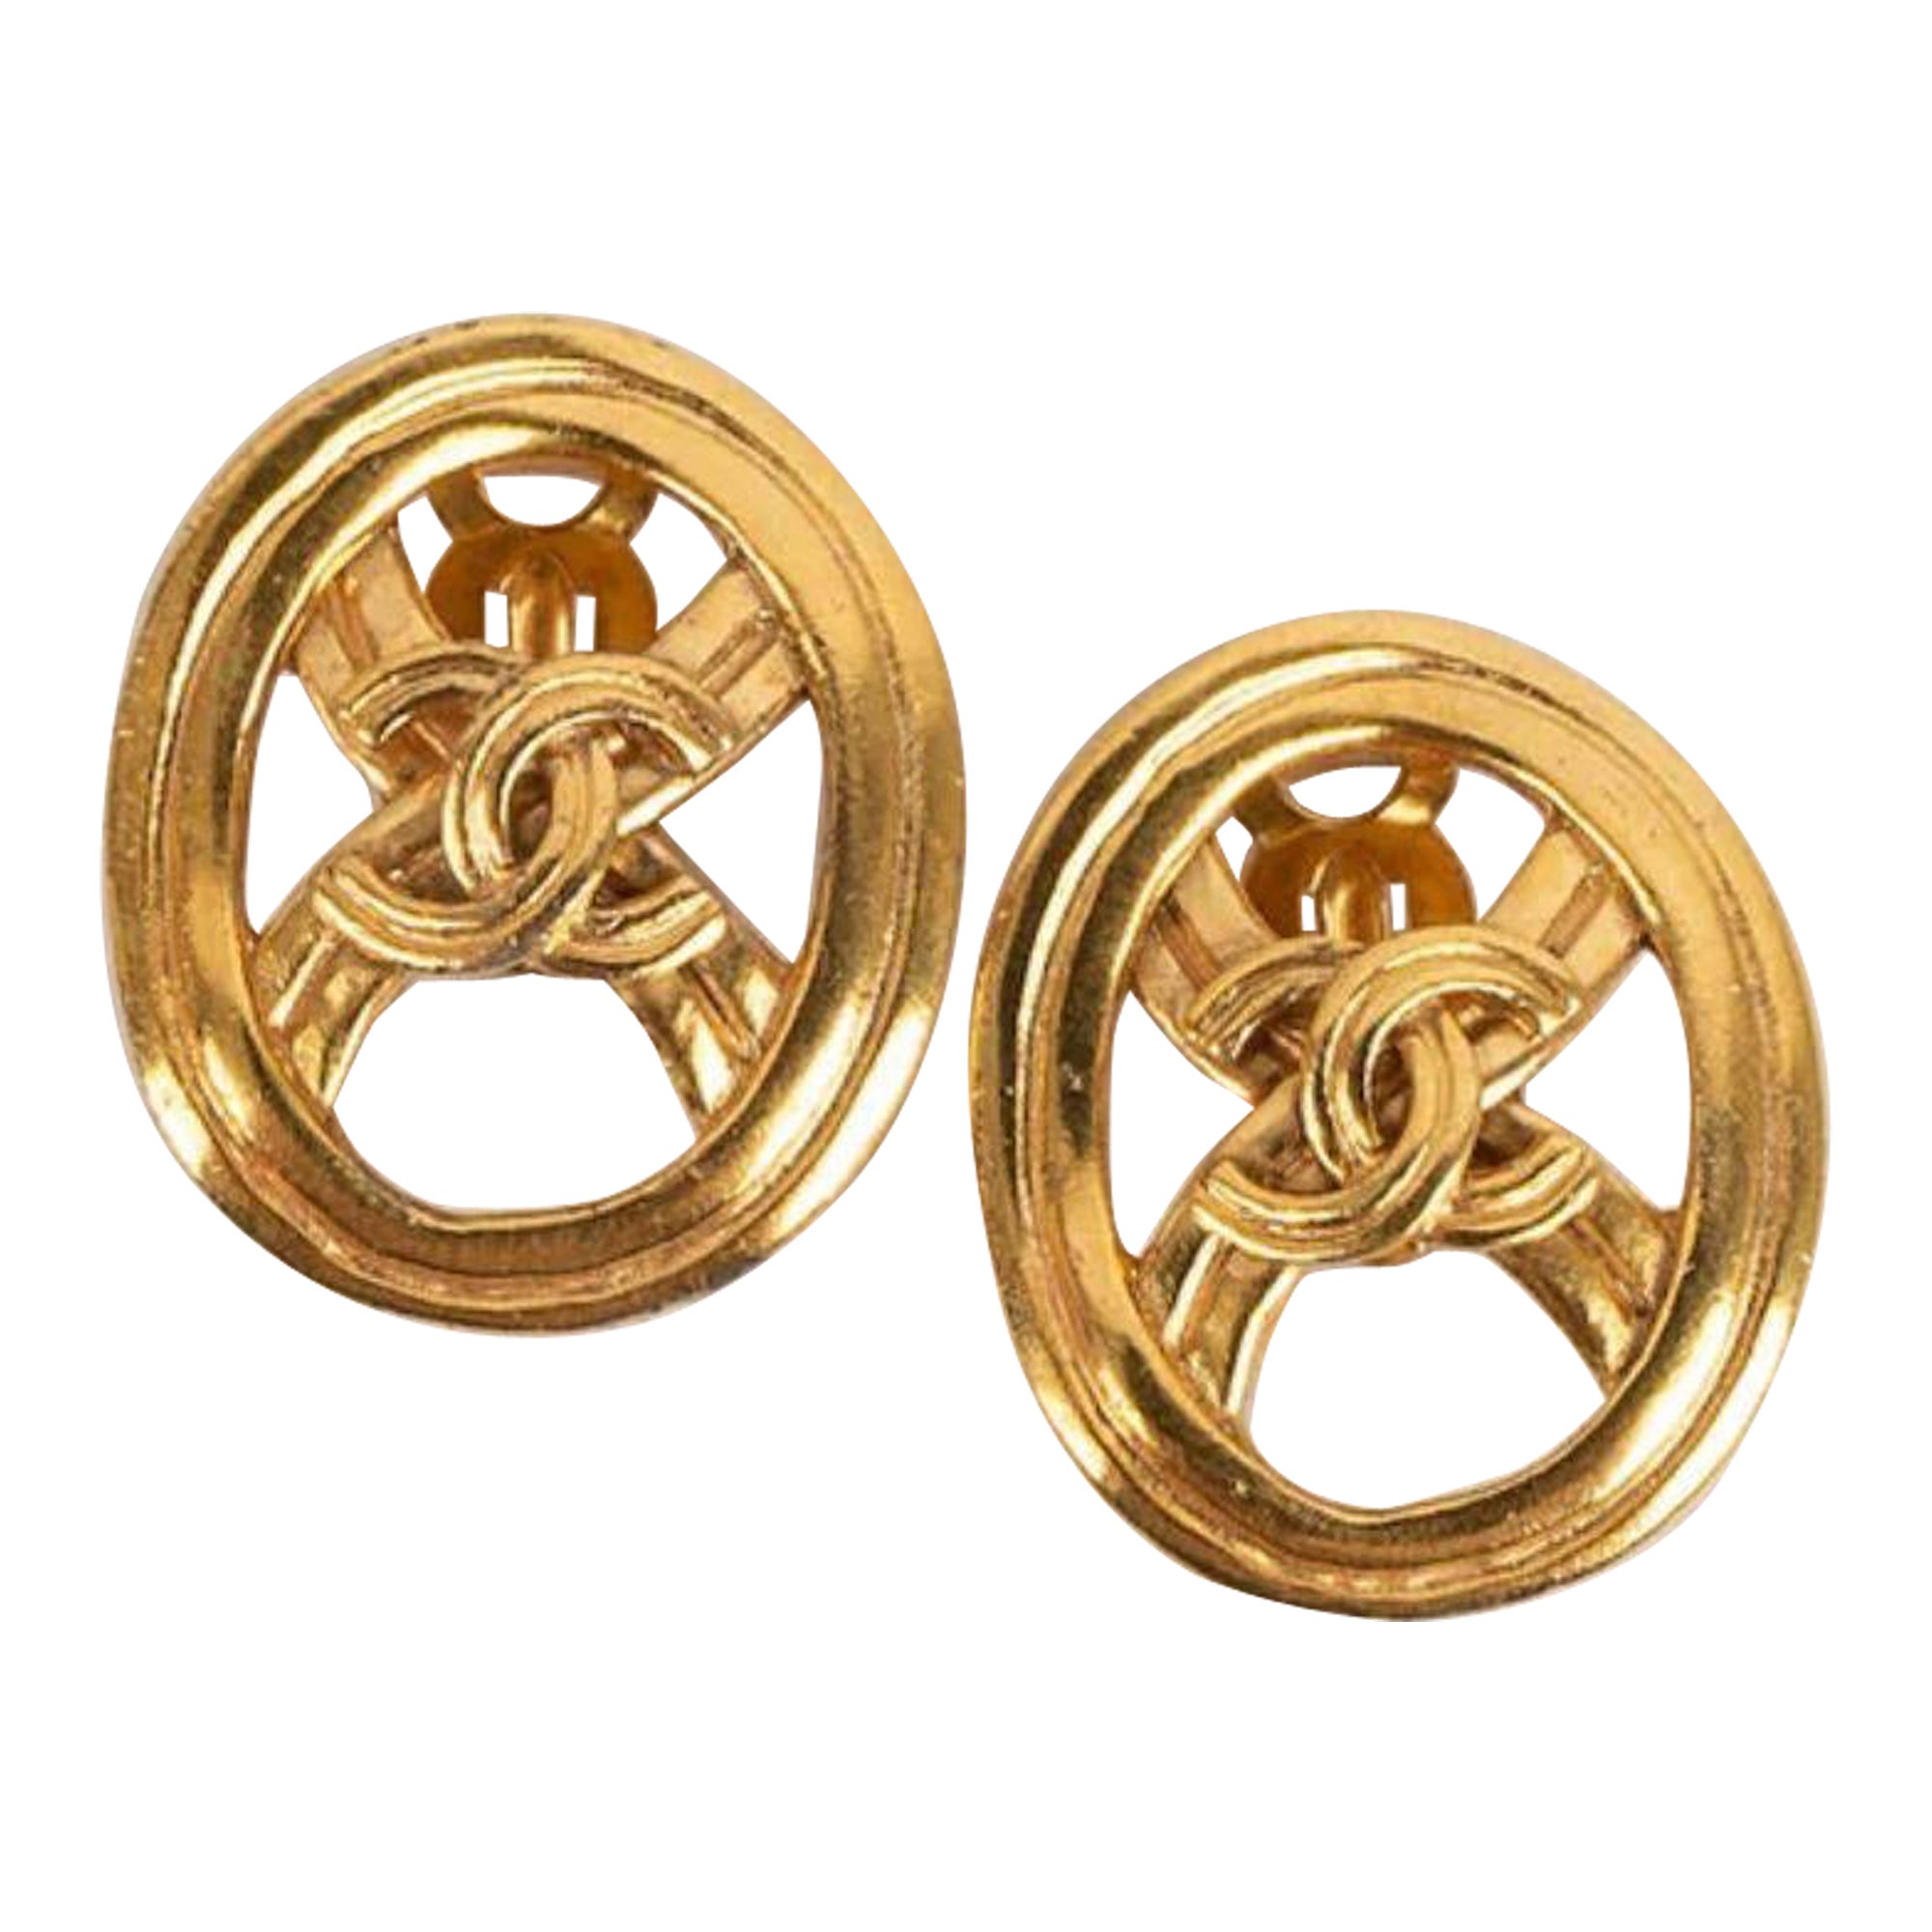 Chanel Earring Clips in Gold Metal, 1996 For Sale